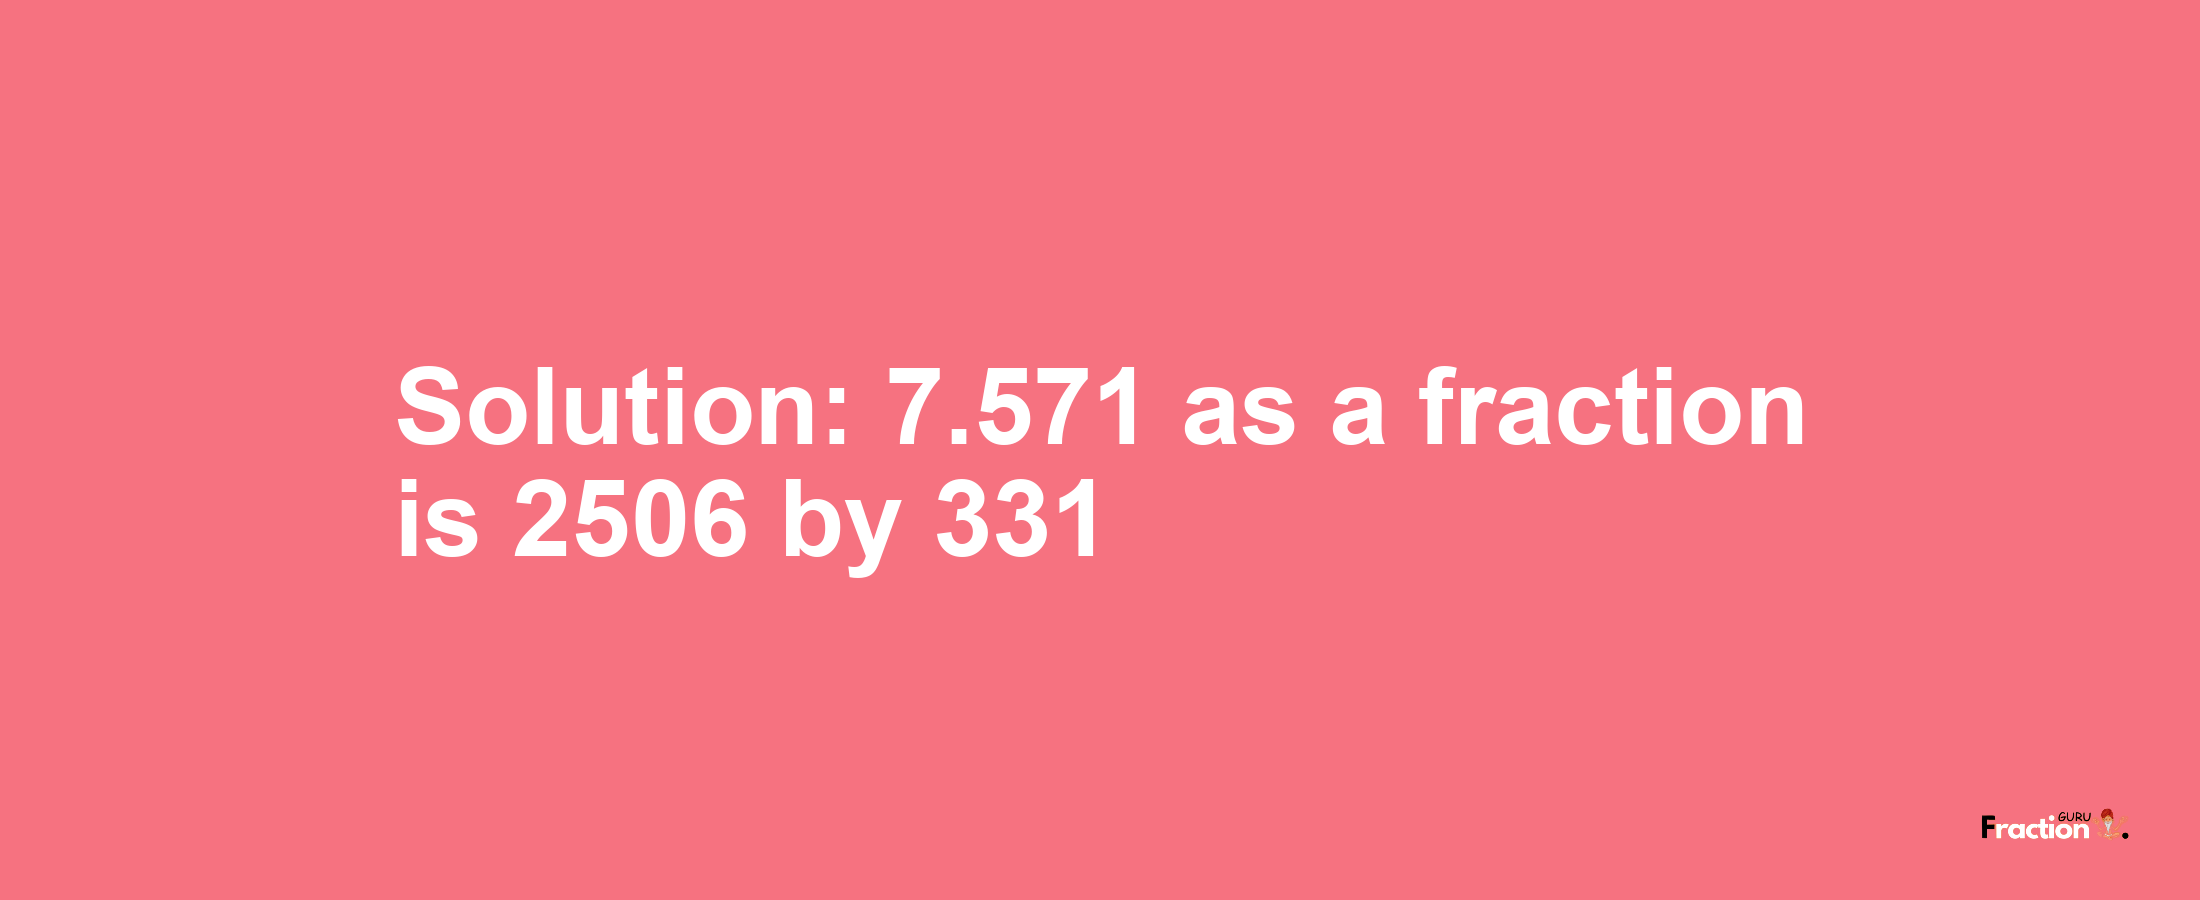 Solution:7.571 as a fraction is 2506/331